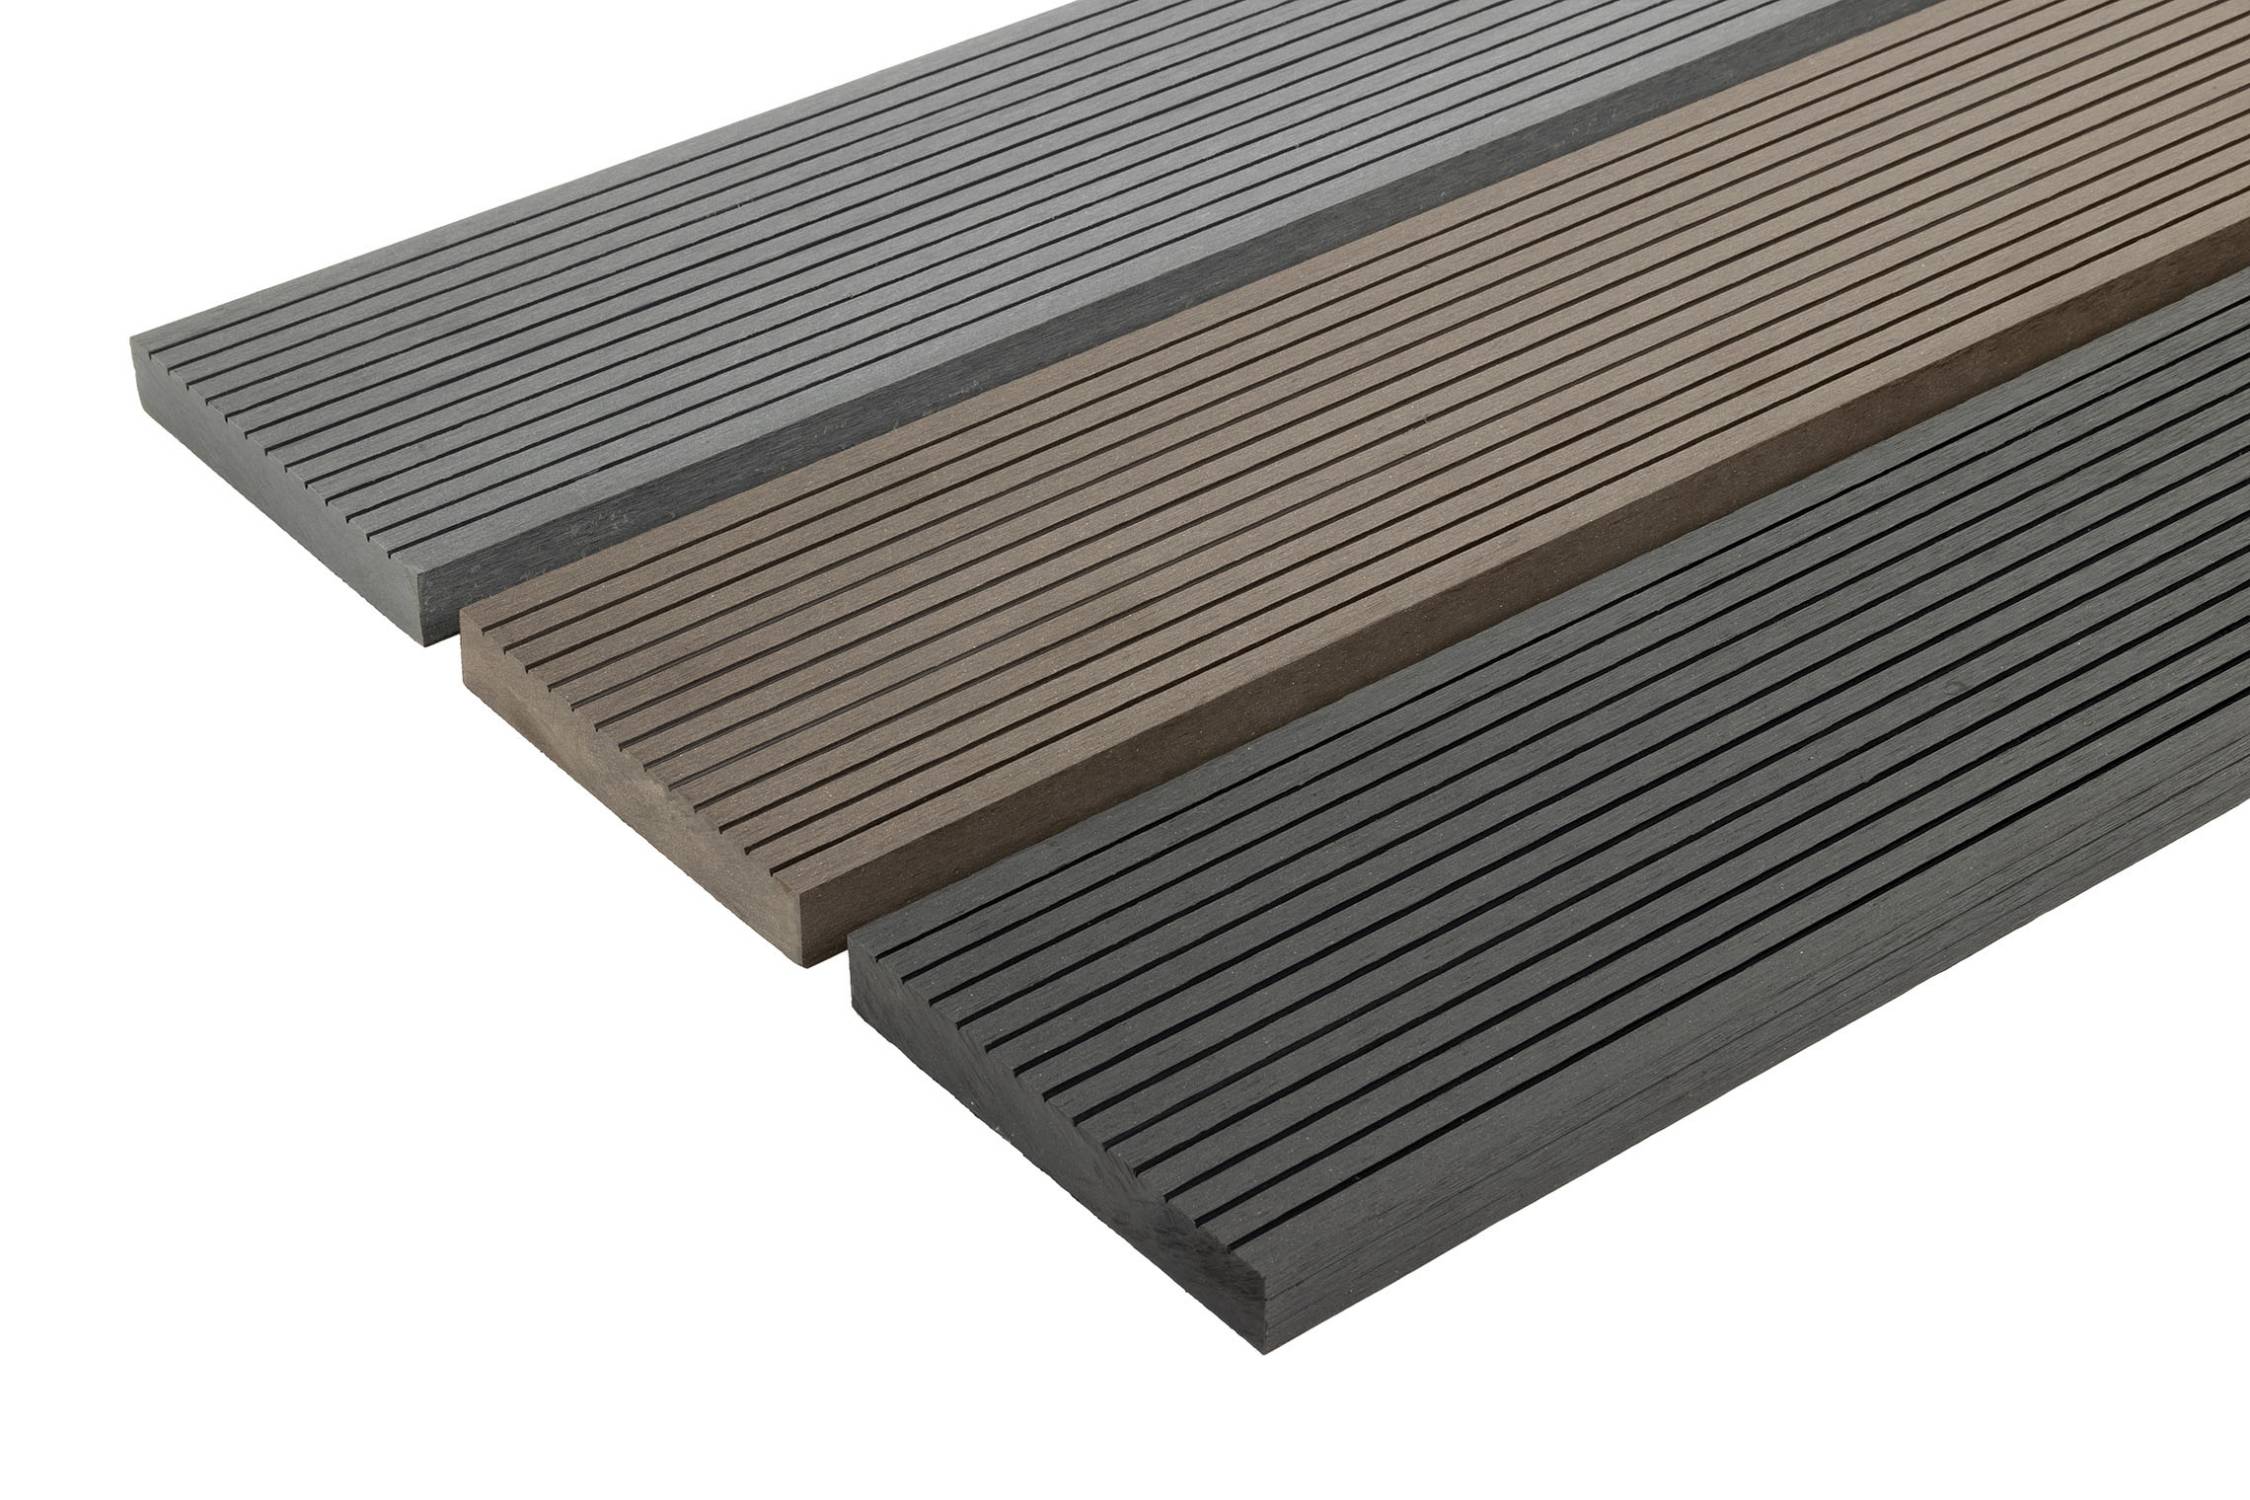 Class B Fire Resistant Contemporary Decking (Hollow or Solid options)